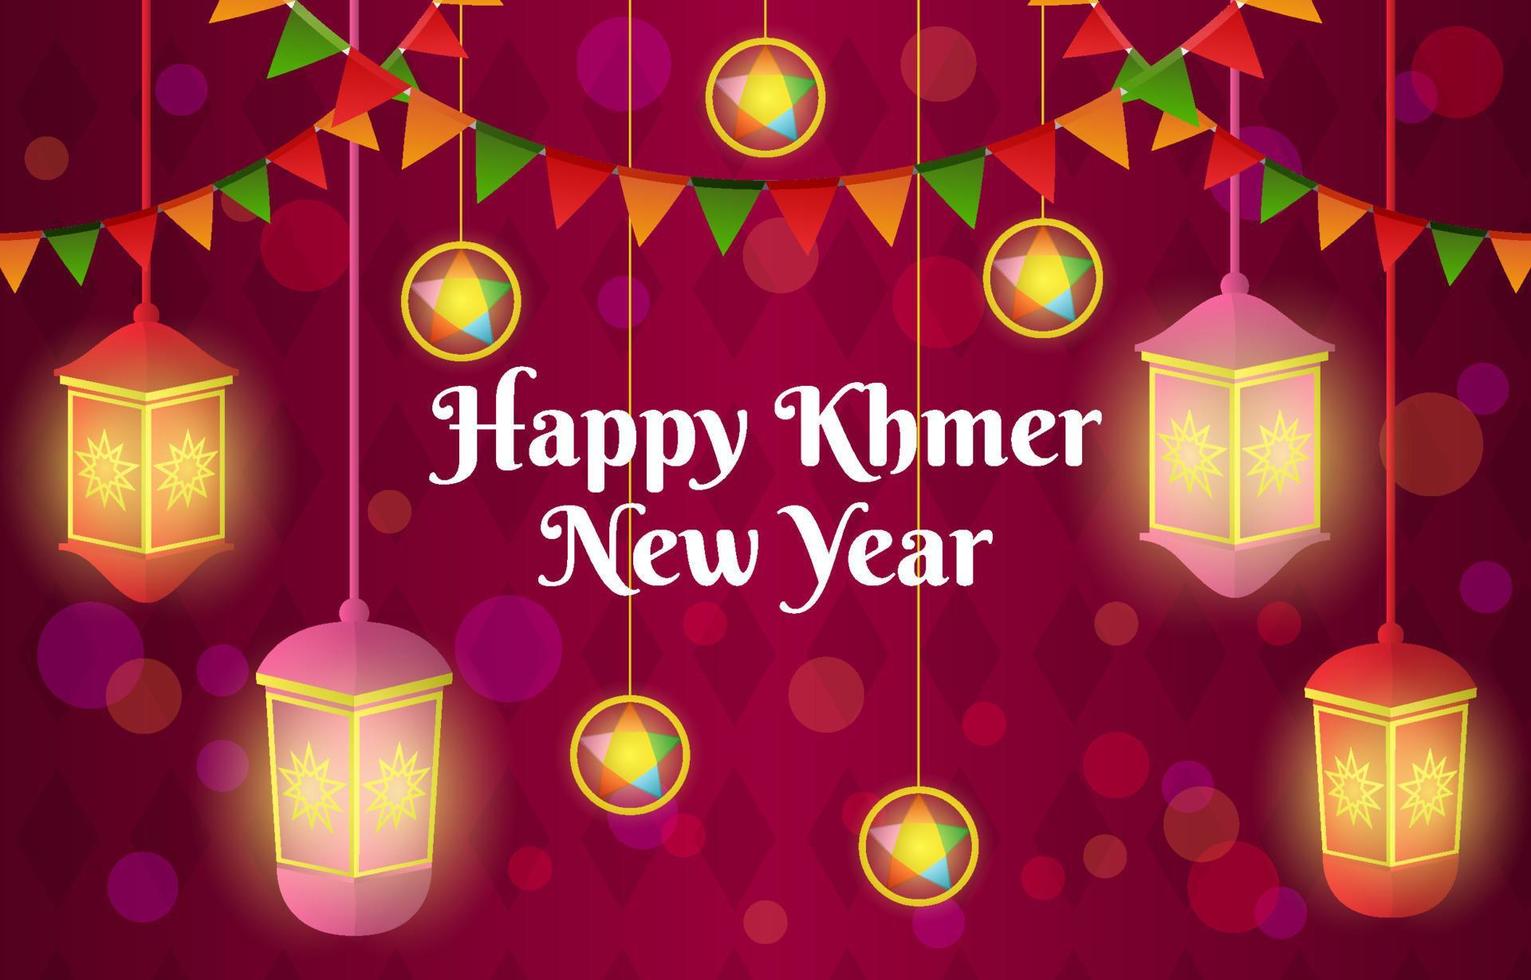 Khmer New Year Background vector